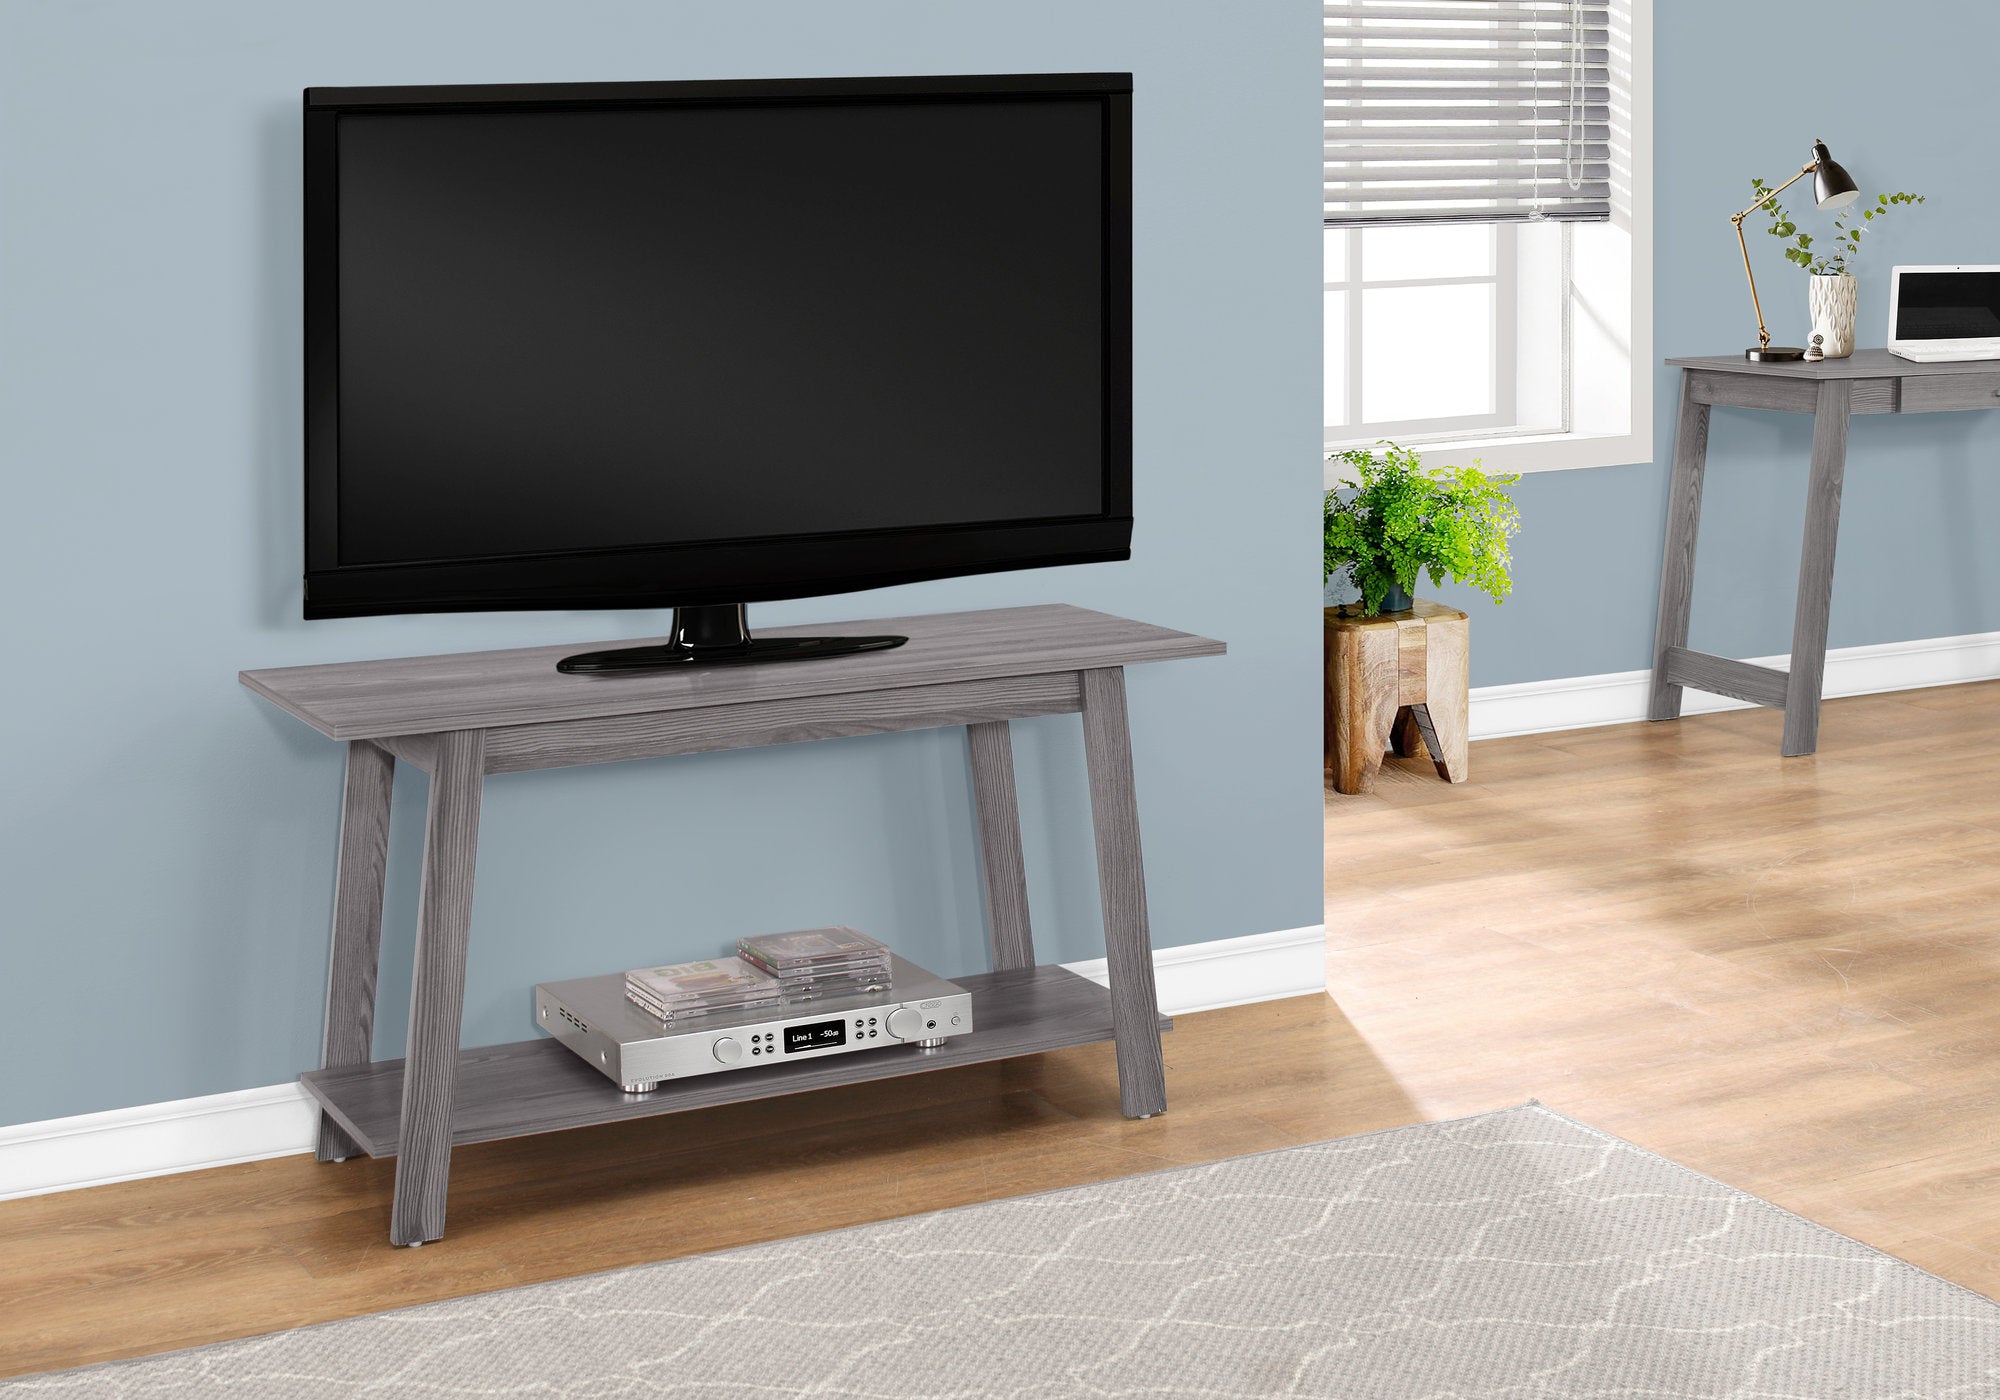 MN-132737    Tv Stand, 42 Inch, Console, Media Entertainment Center, Storage Cabinet, Living Room, Bedroom, Laminate, Grey, Contemporary, Modern